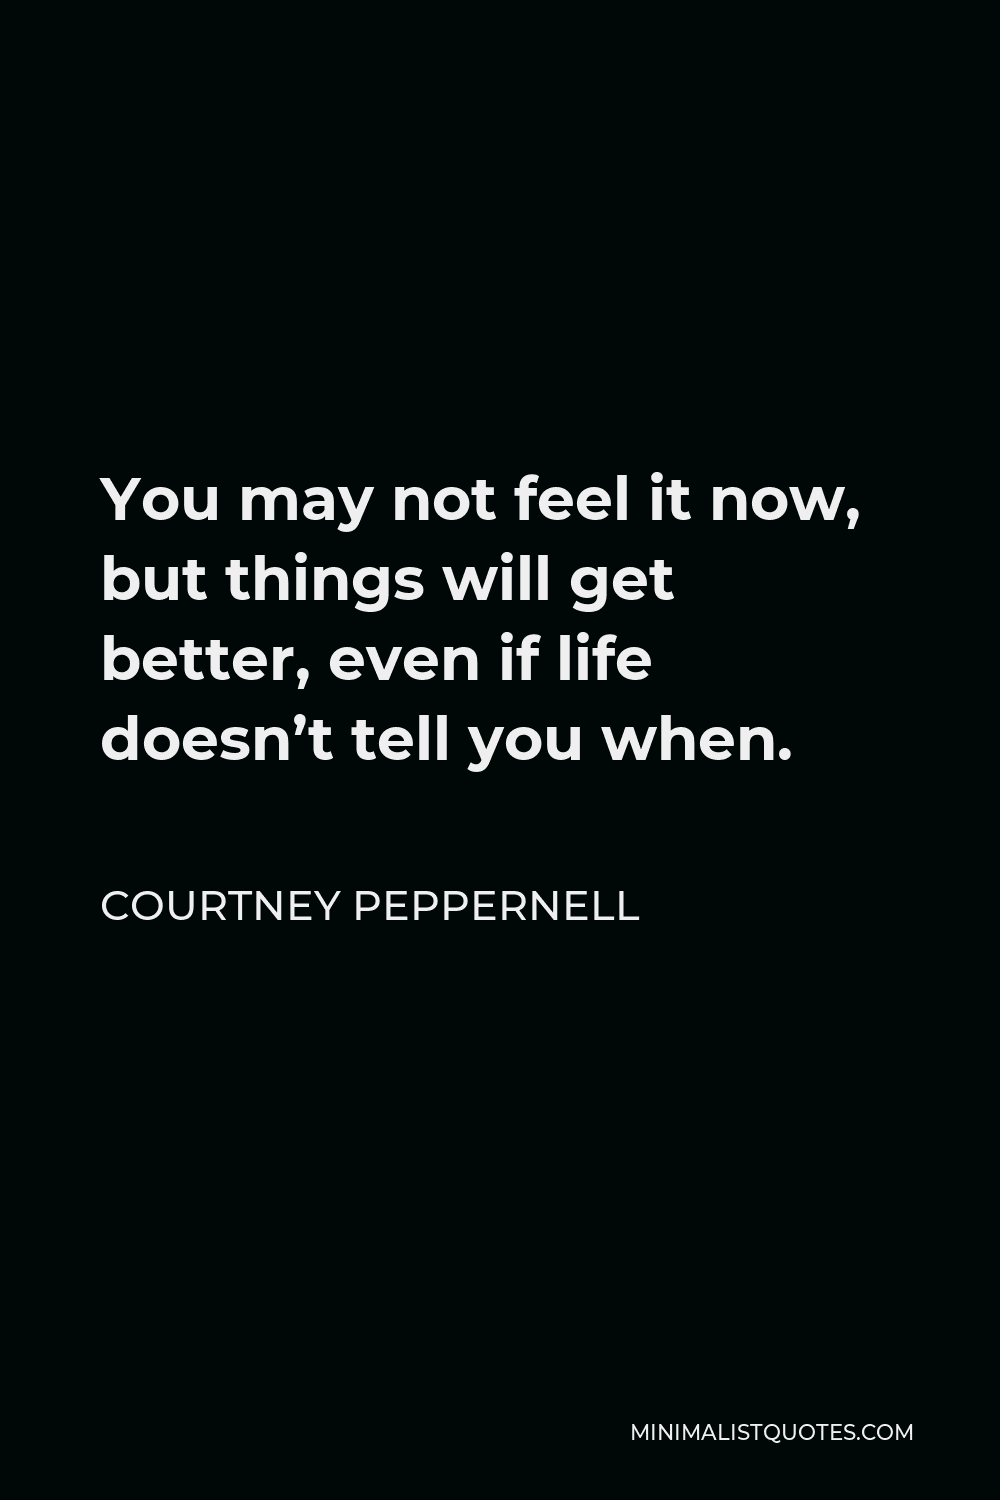 Courtney Peppernell Quote - You may not feel it now, but things will get better, even if life doesn’t tell you when.